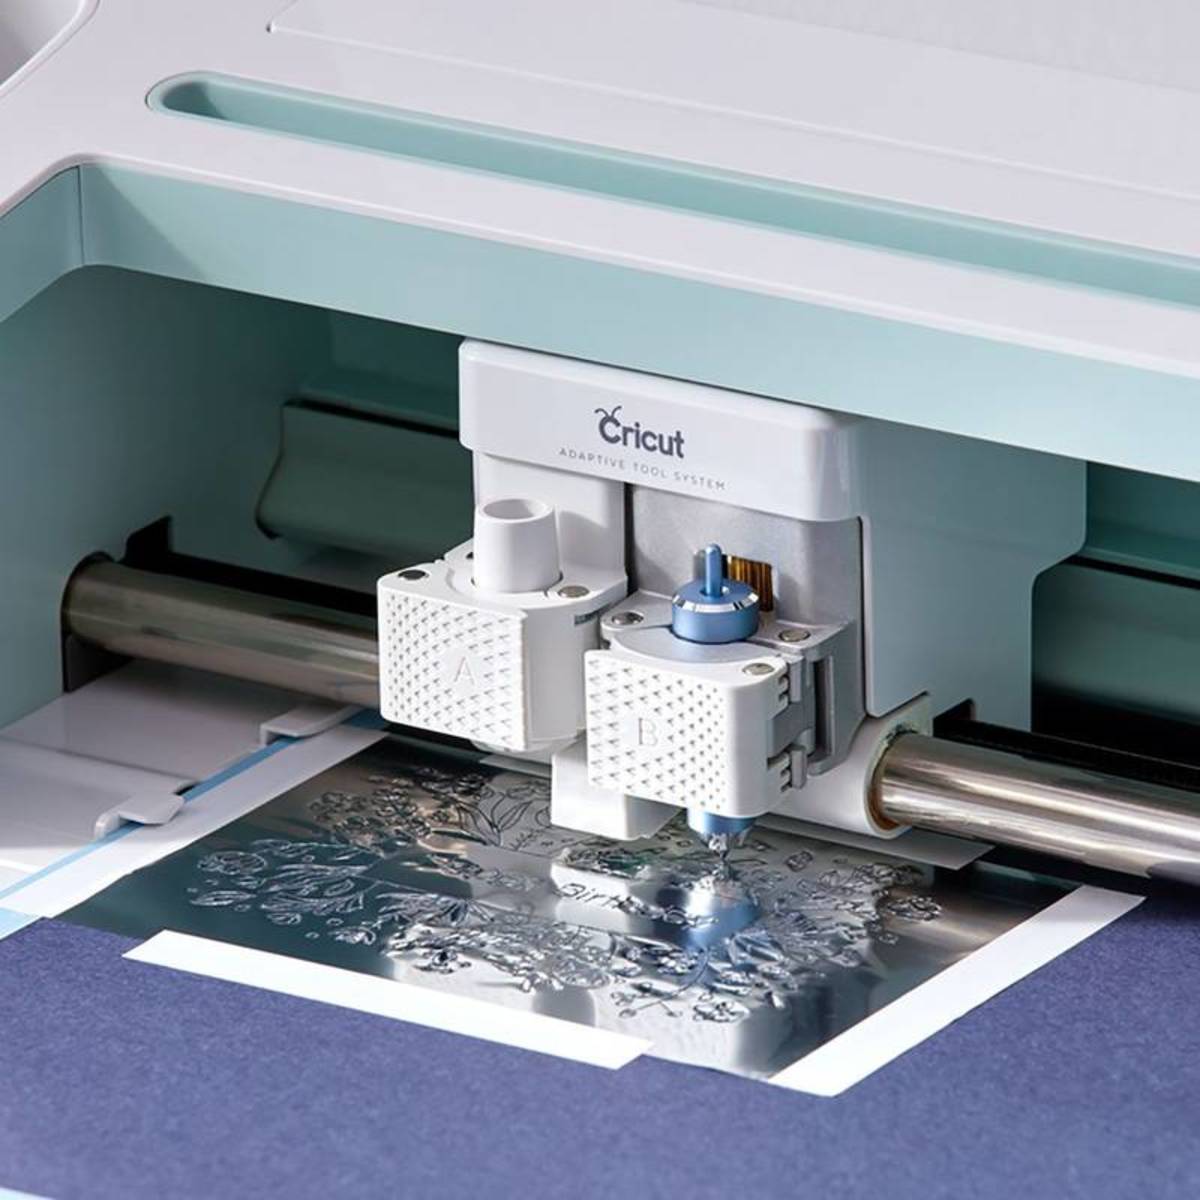 The Cricut Foil Transfer Kit allows you to add foil without any extra machines